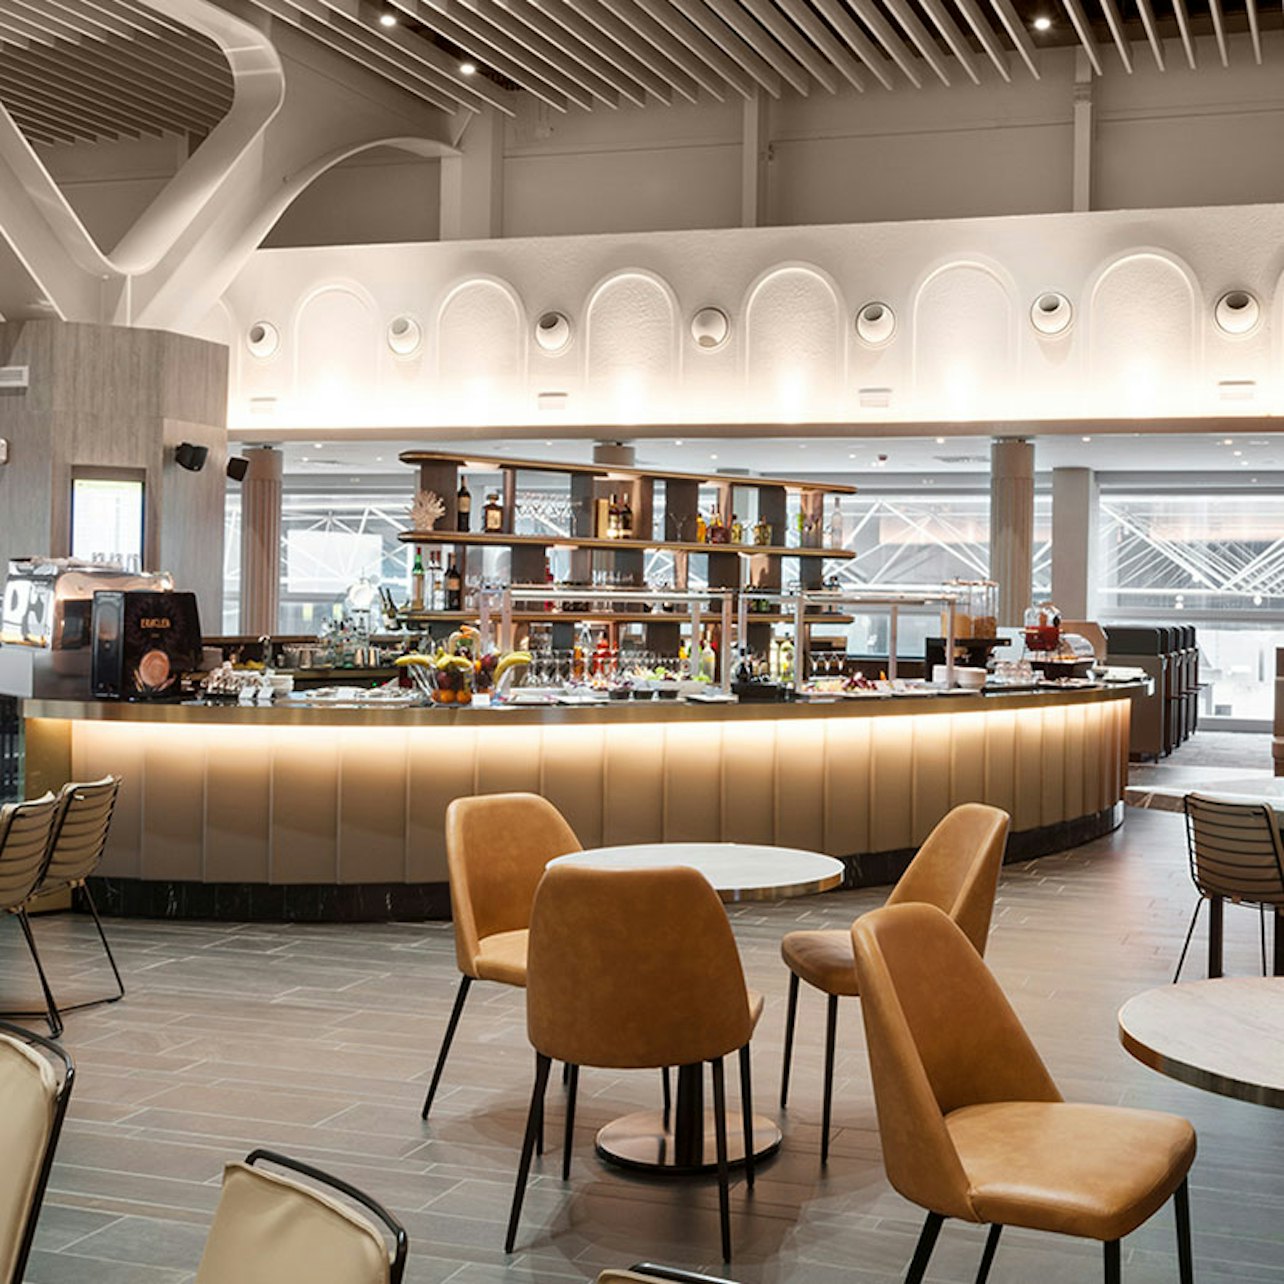 Plaza Premium Lounge at Fiumicino Airport - Accommodations in Rome